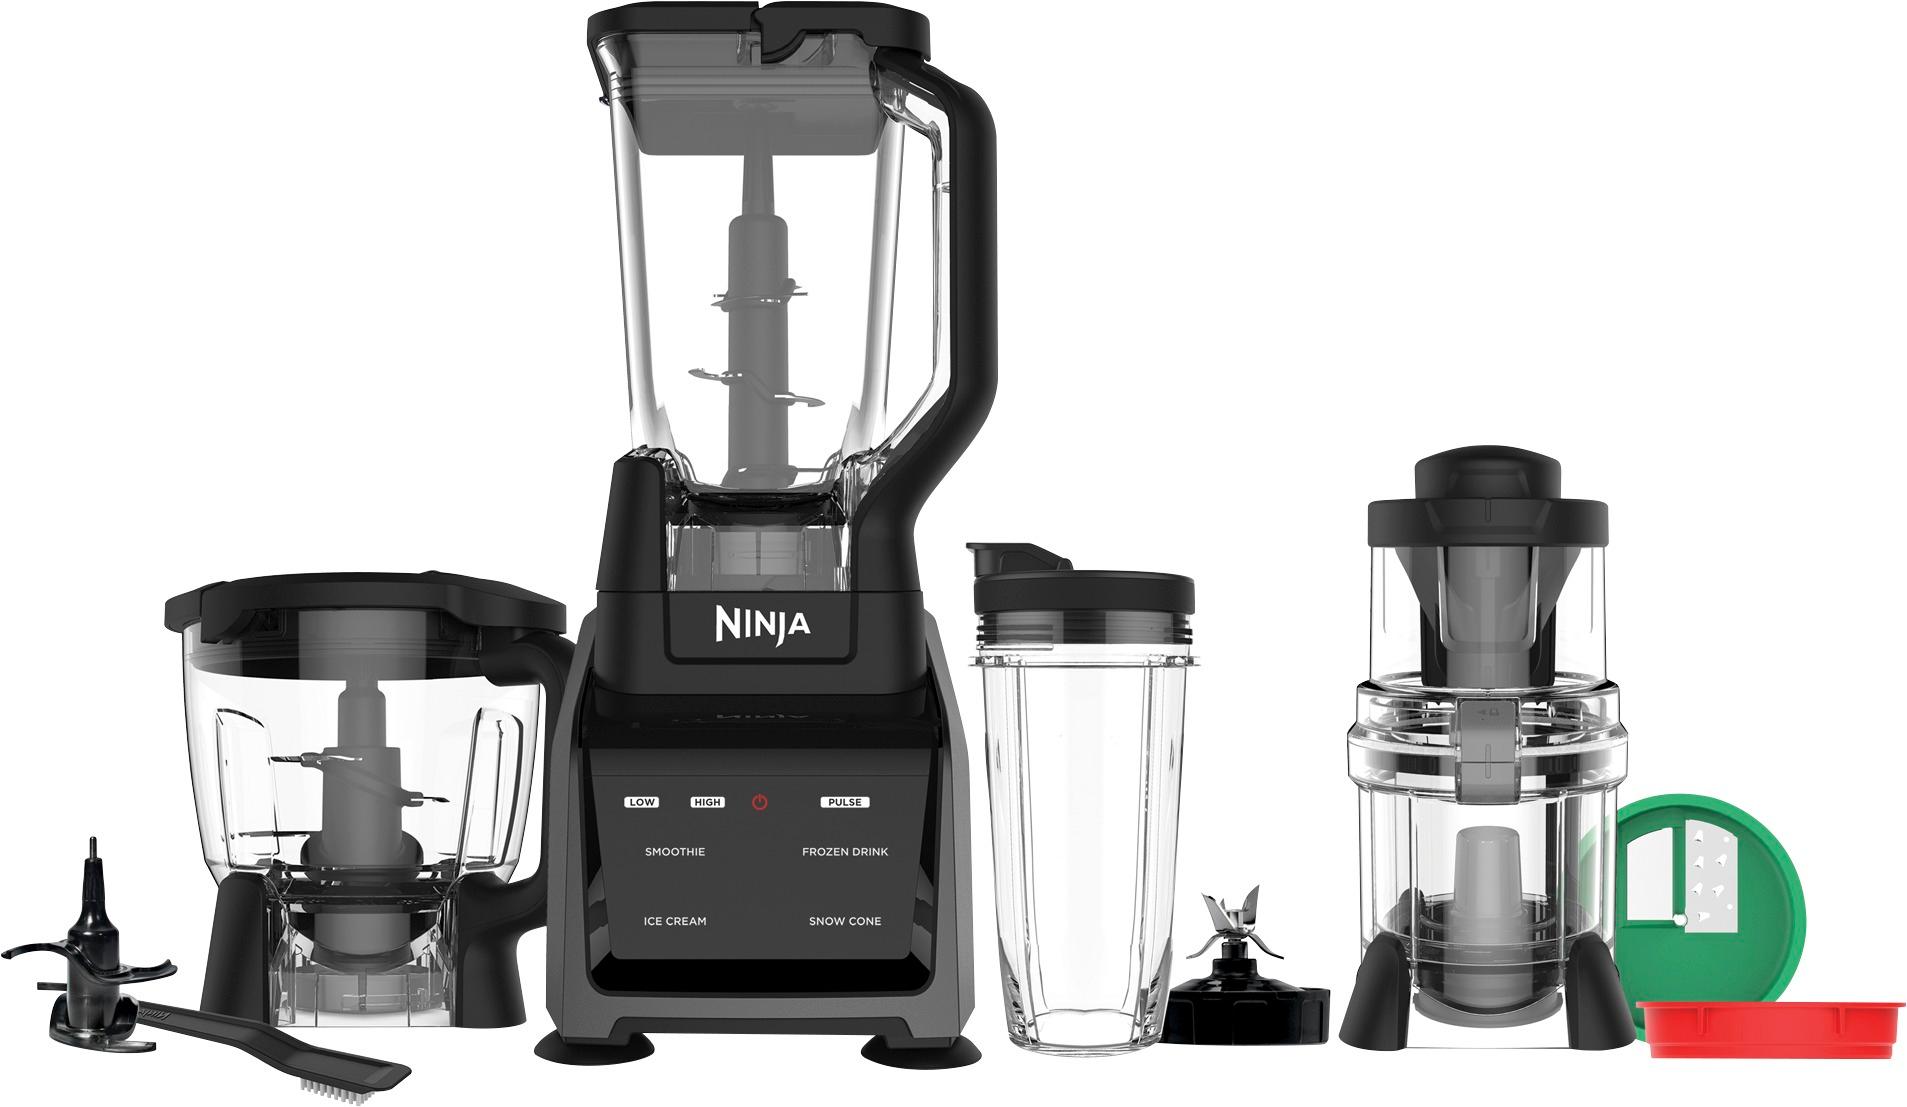 Ninja – Kitchen Appliances For The Food You Love